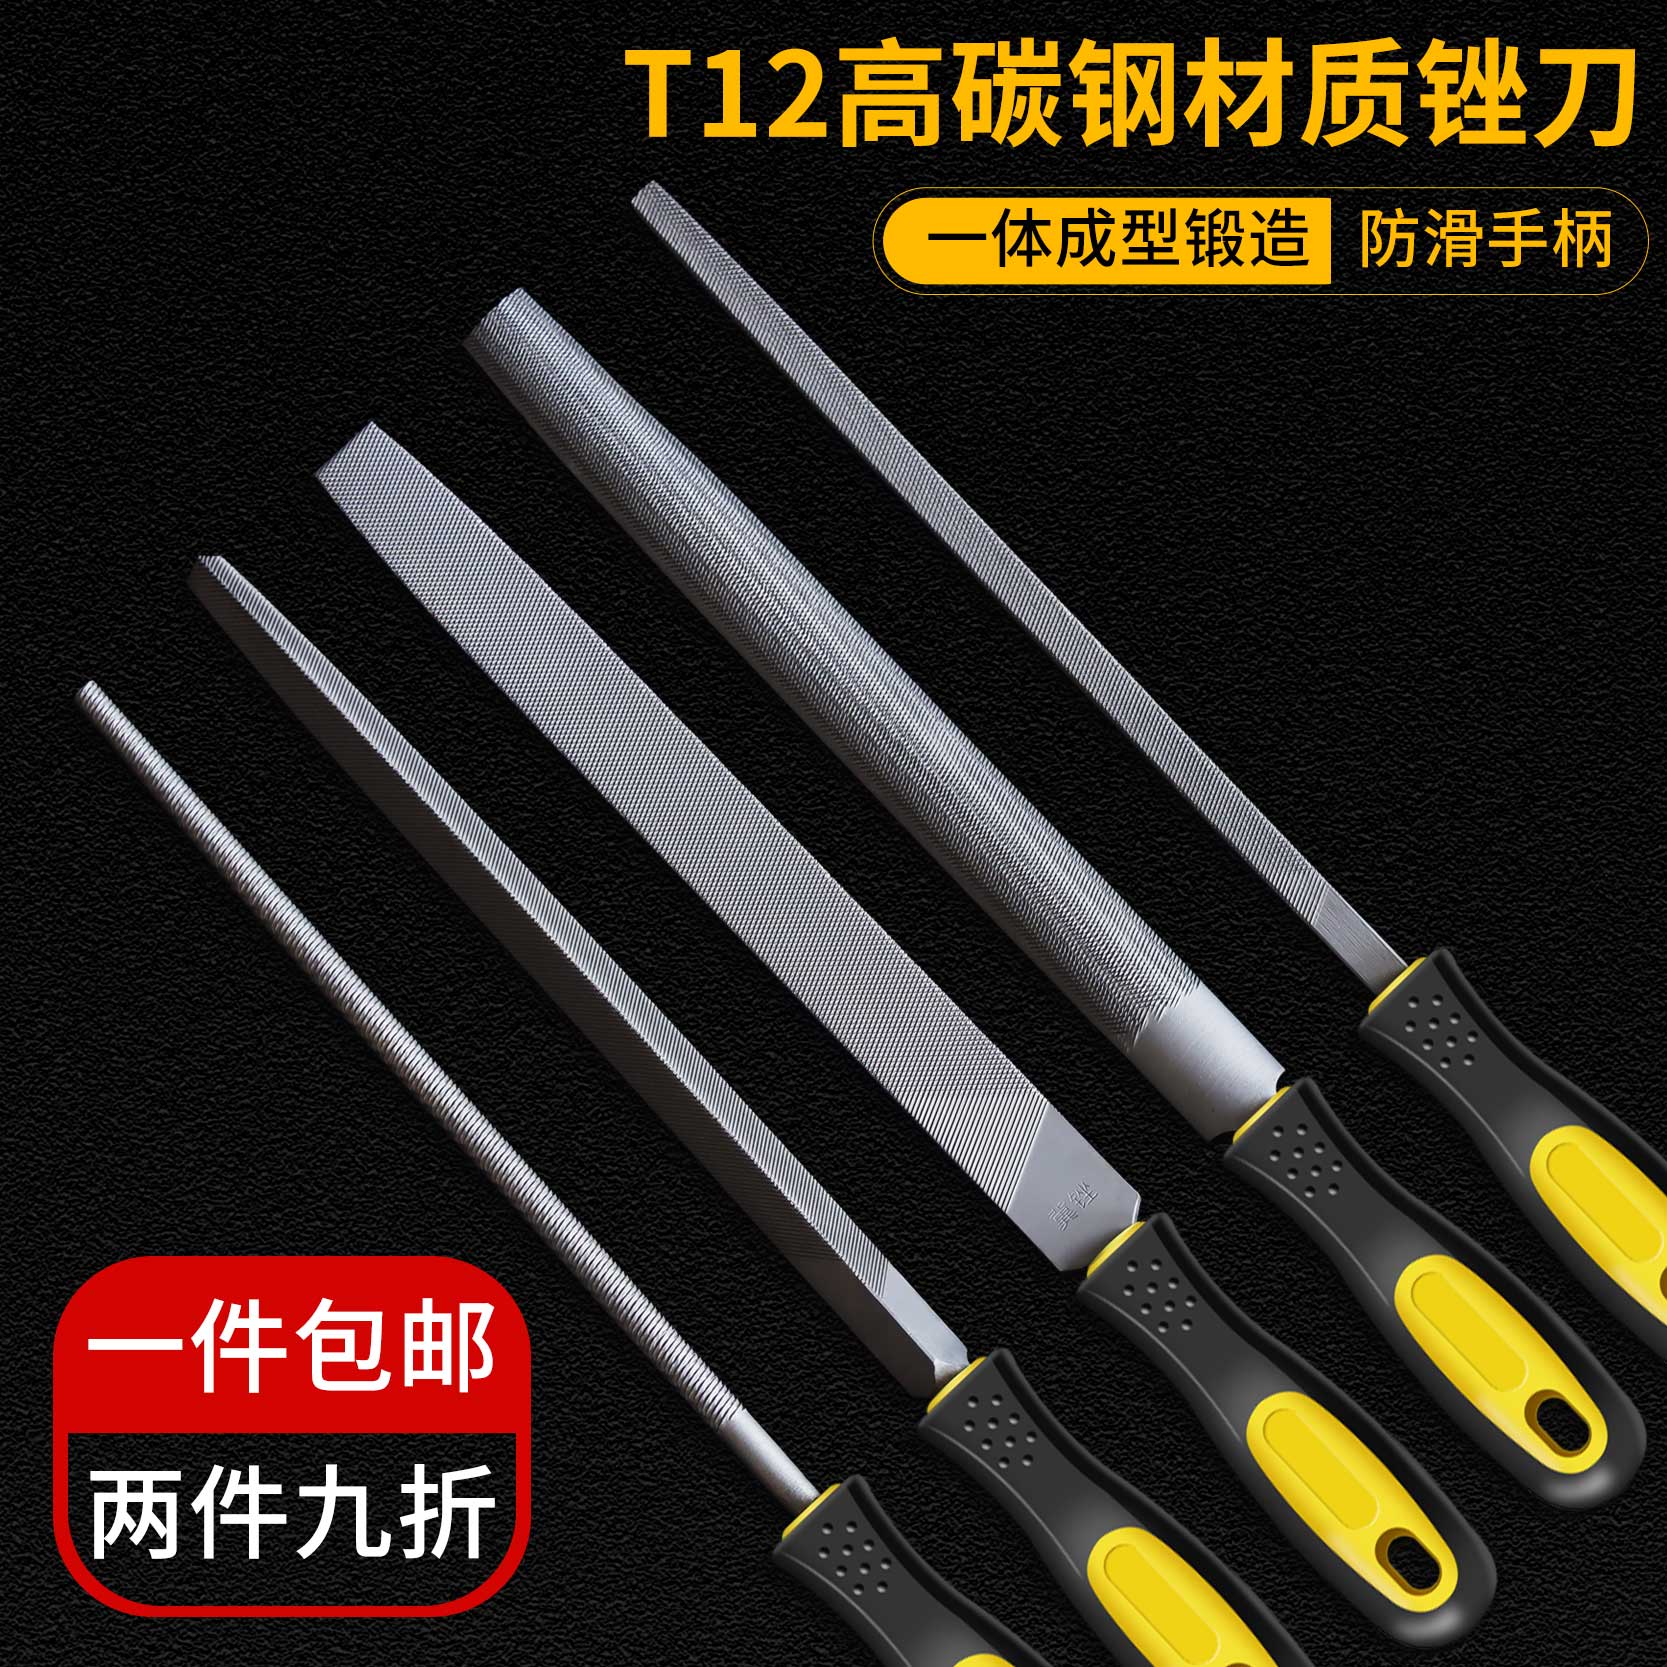 File Steel file Metal woodworking round file Rubbing knife Flat file Flat file Semicircular triangle fitter damper knife Round flat grinding tool